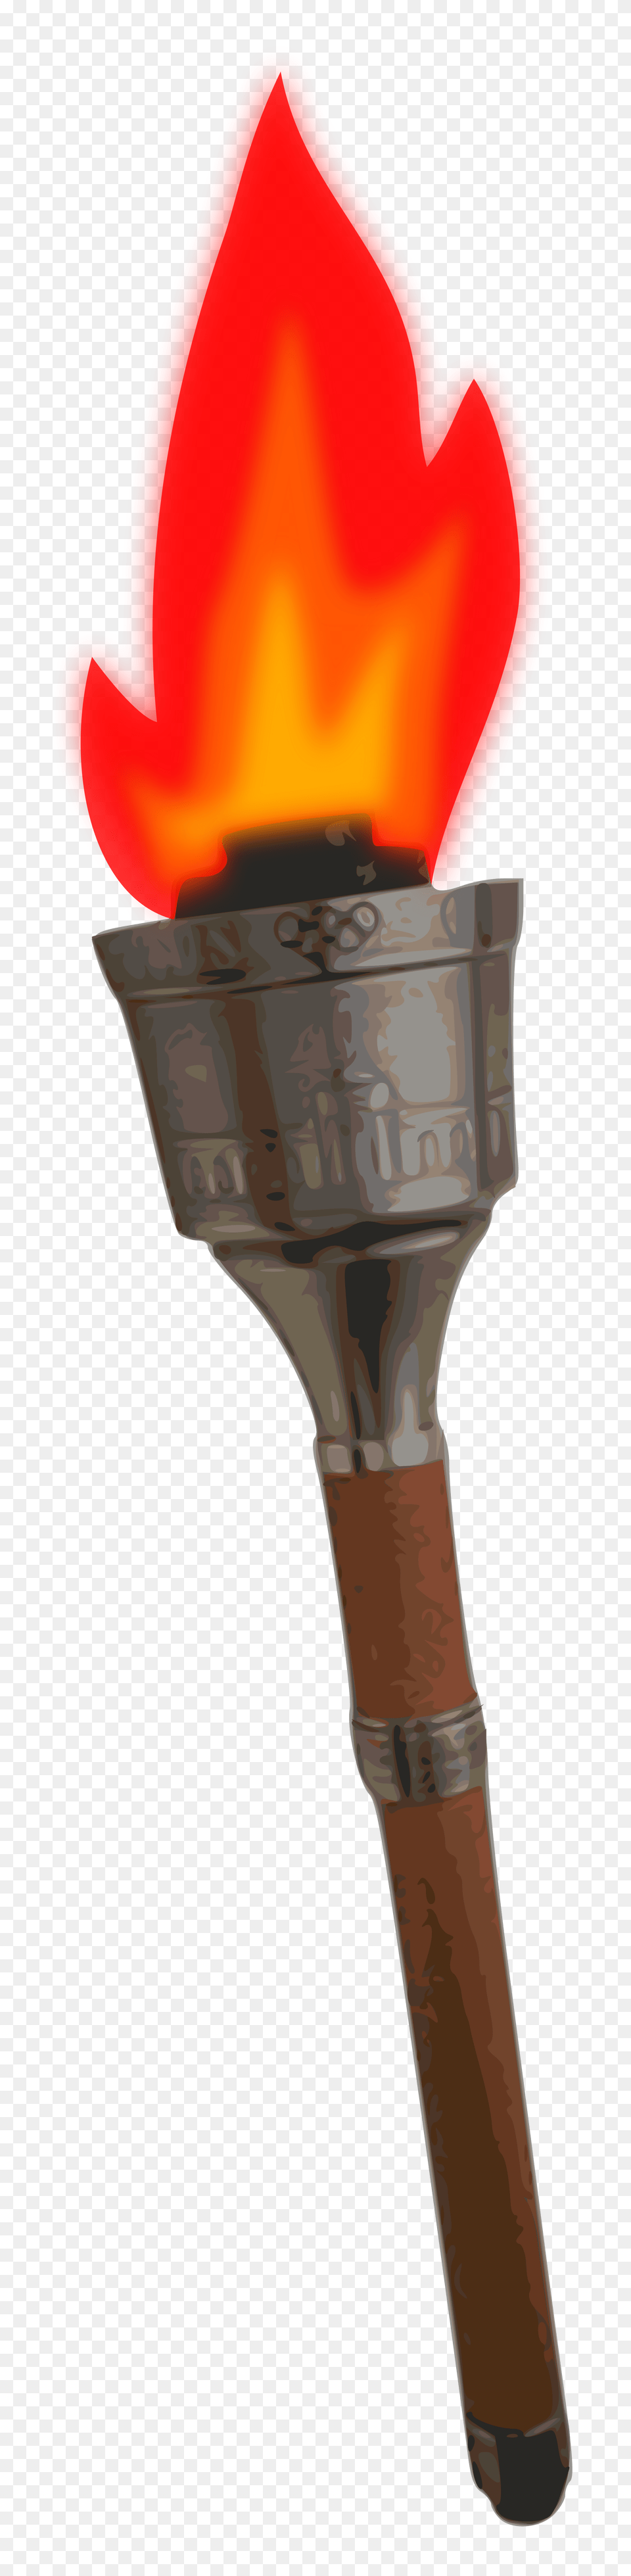 Olympic Torch, Light, Mace Club, Weapon Png